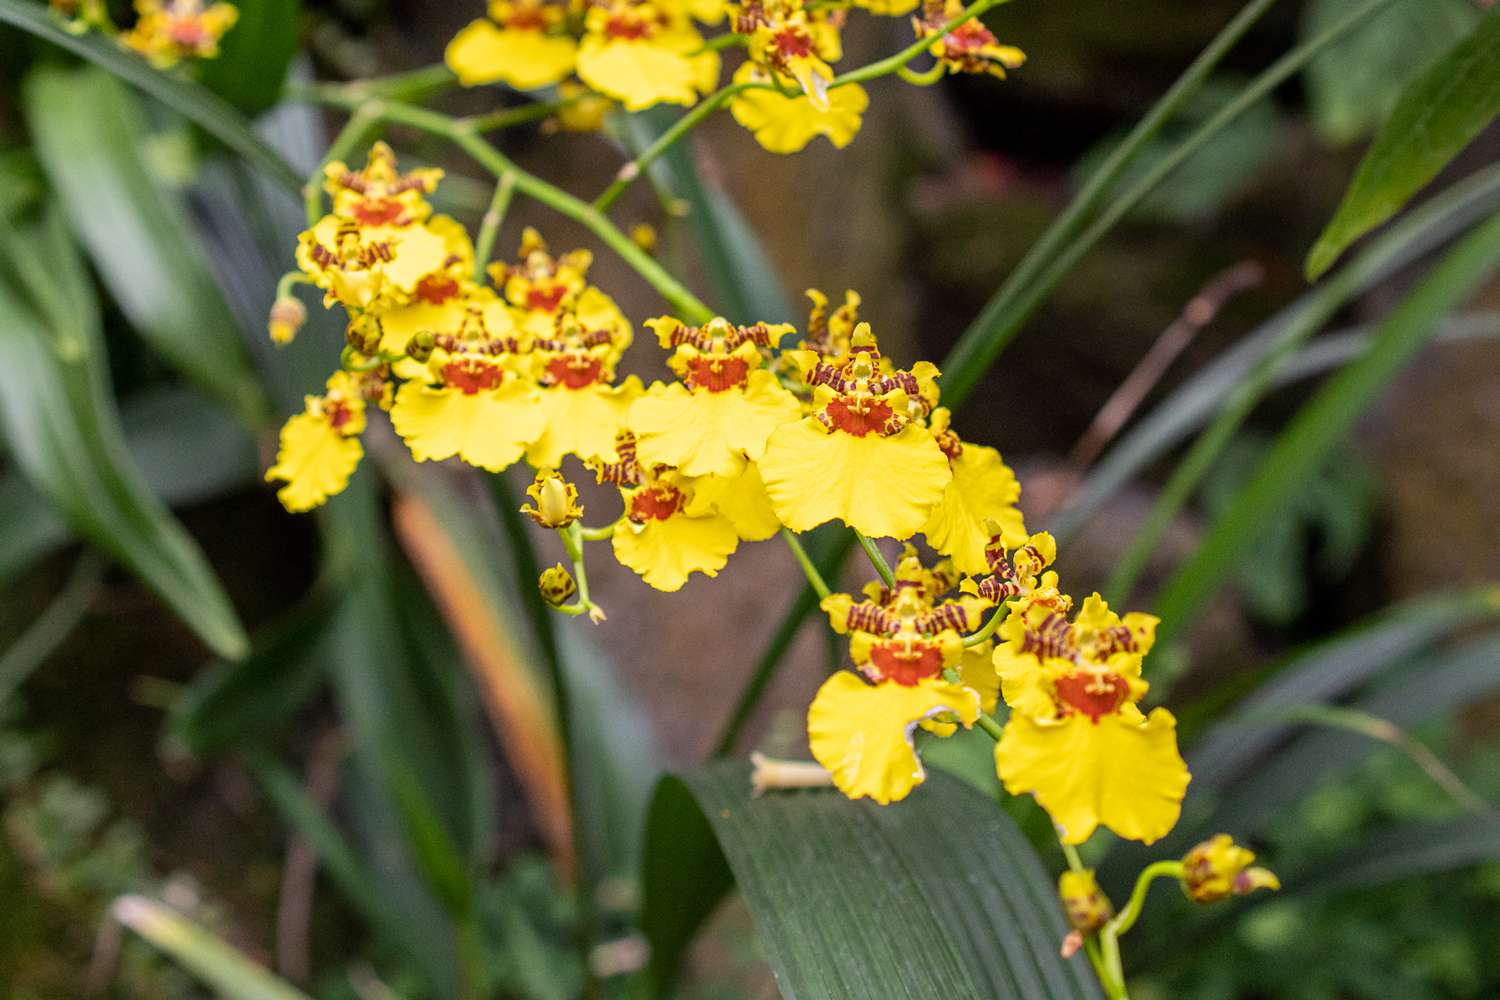 Trichocentrum orchids with bright yellow lips clustered on long stem